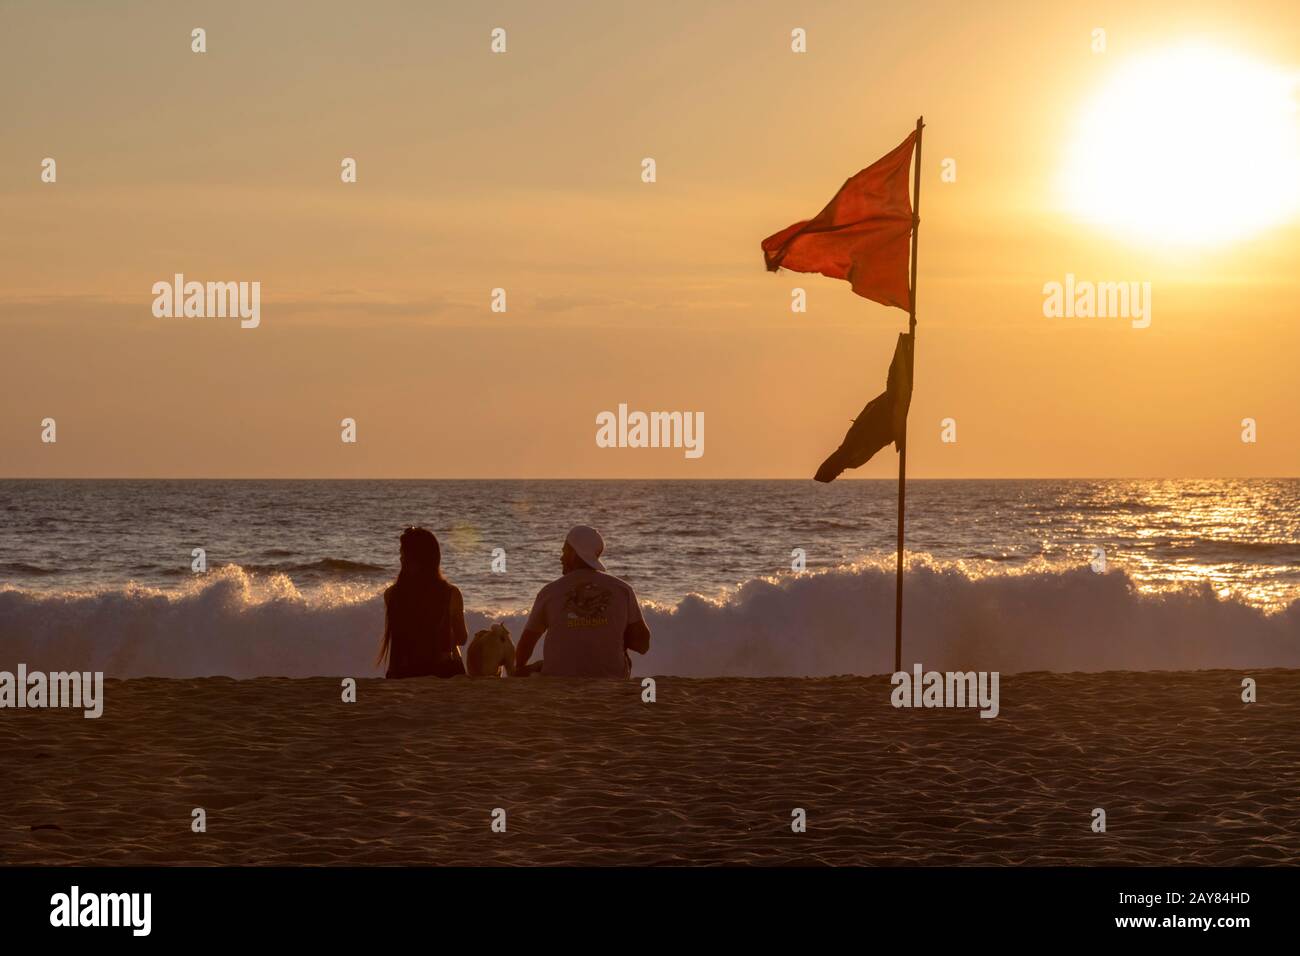 Brisas de Zicatela, Oaxaca, Mexico - A couple enjoys sunset on a Pacific Ocean beach. The red flag warns of dangerous swimming conditions. Stock Photo